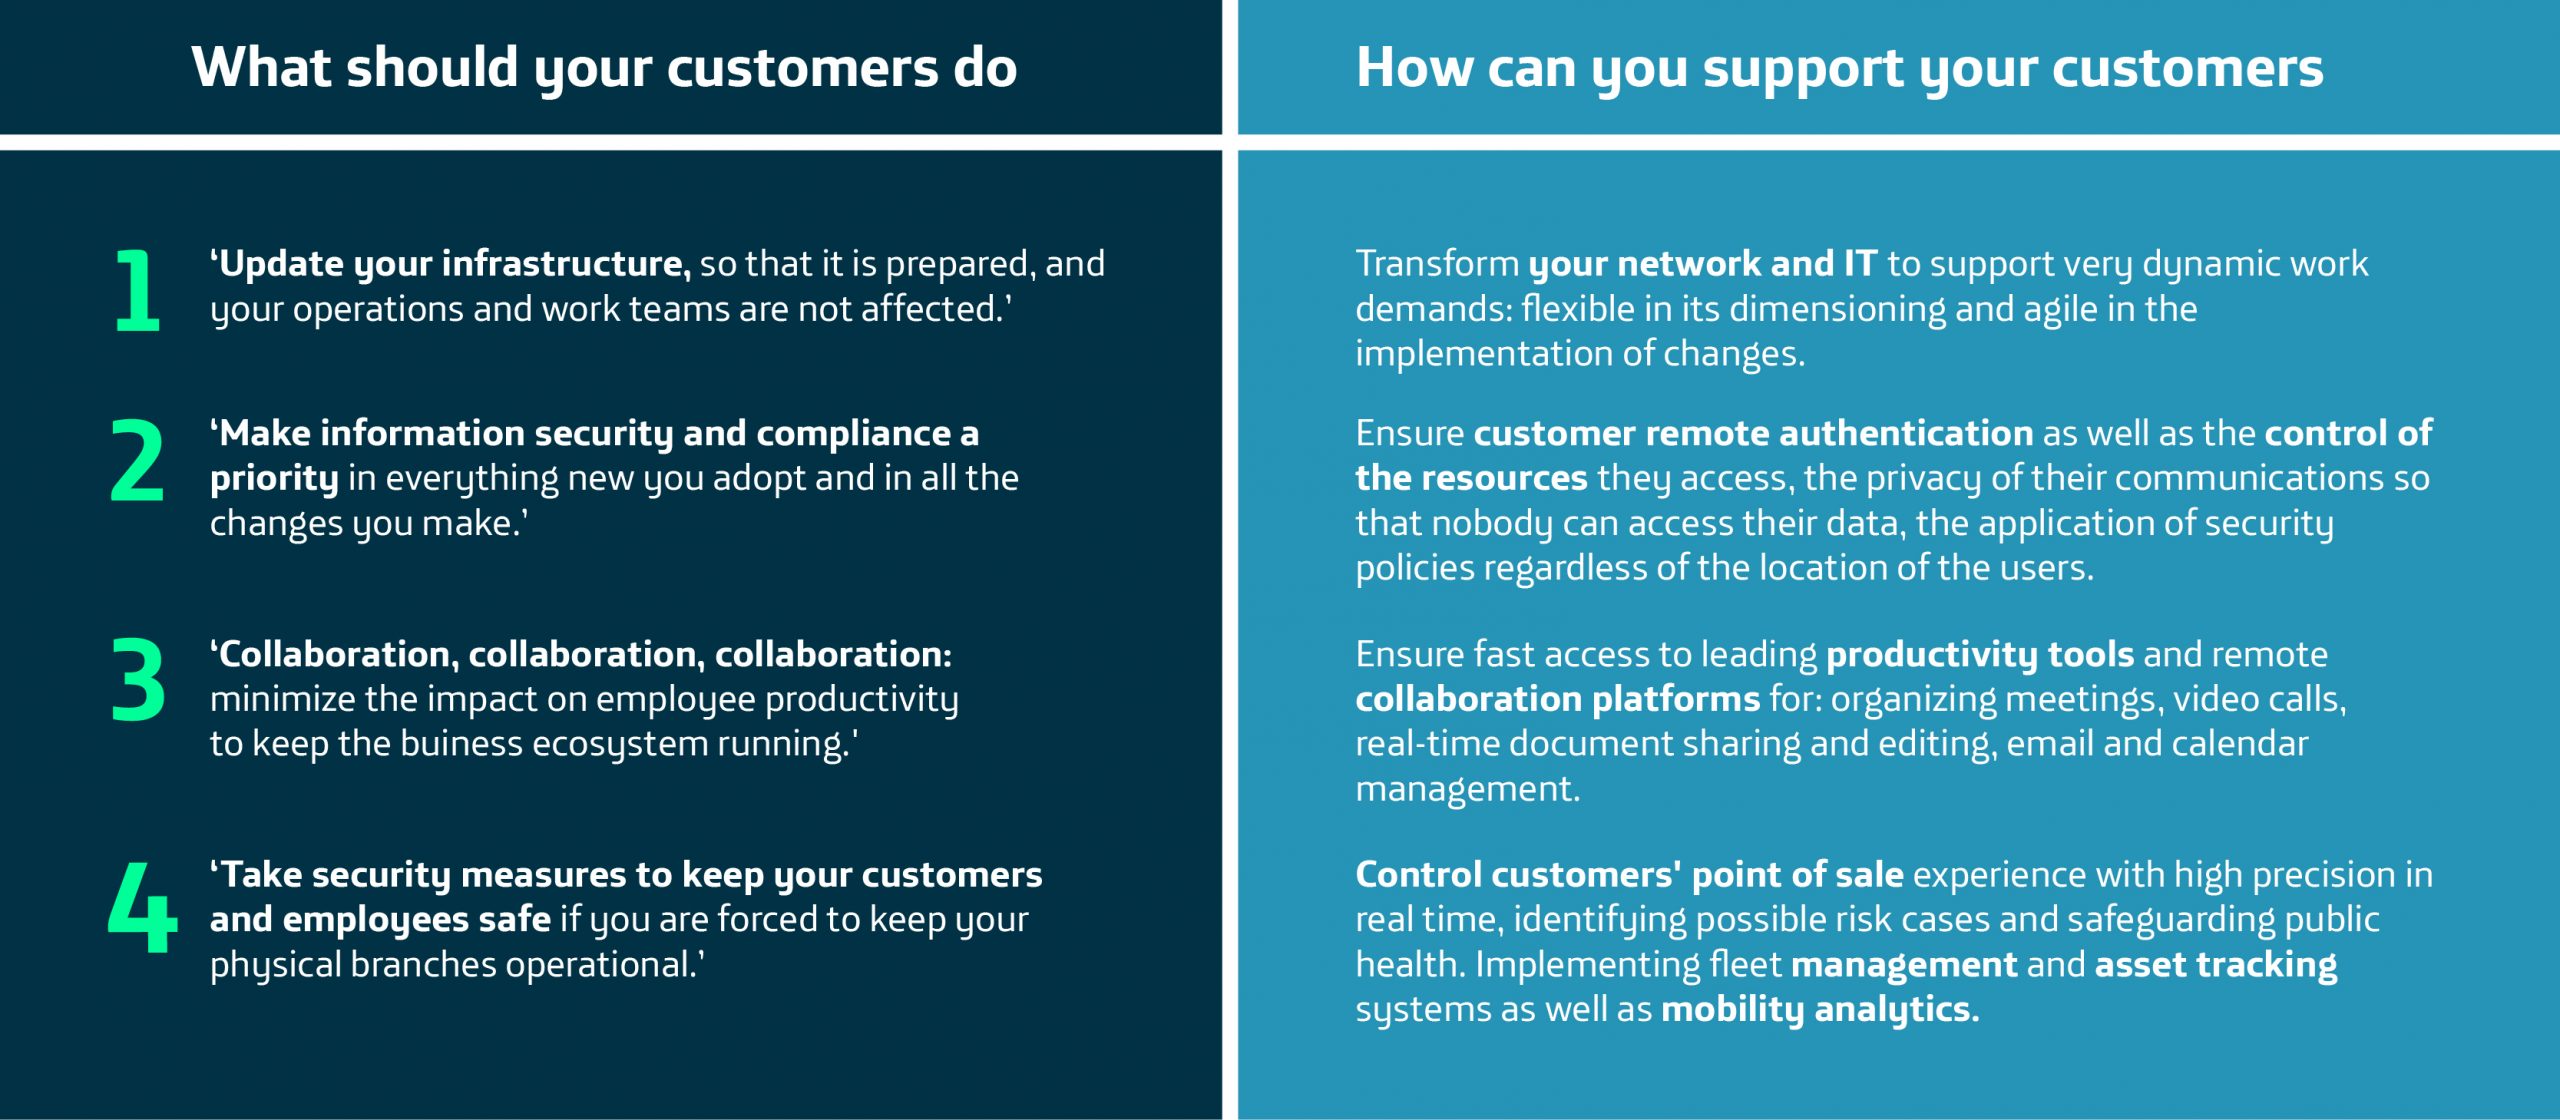 Telefonica Suggestions for Customers Starting Over during COVID